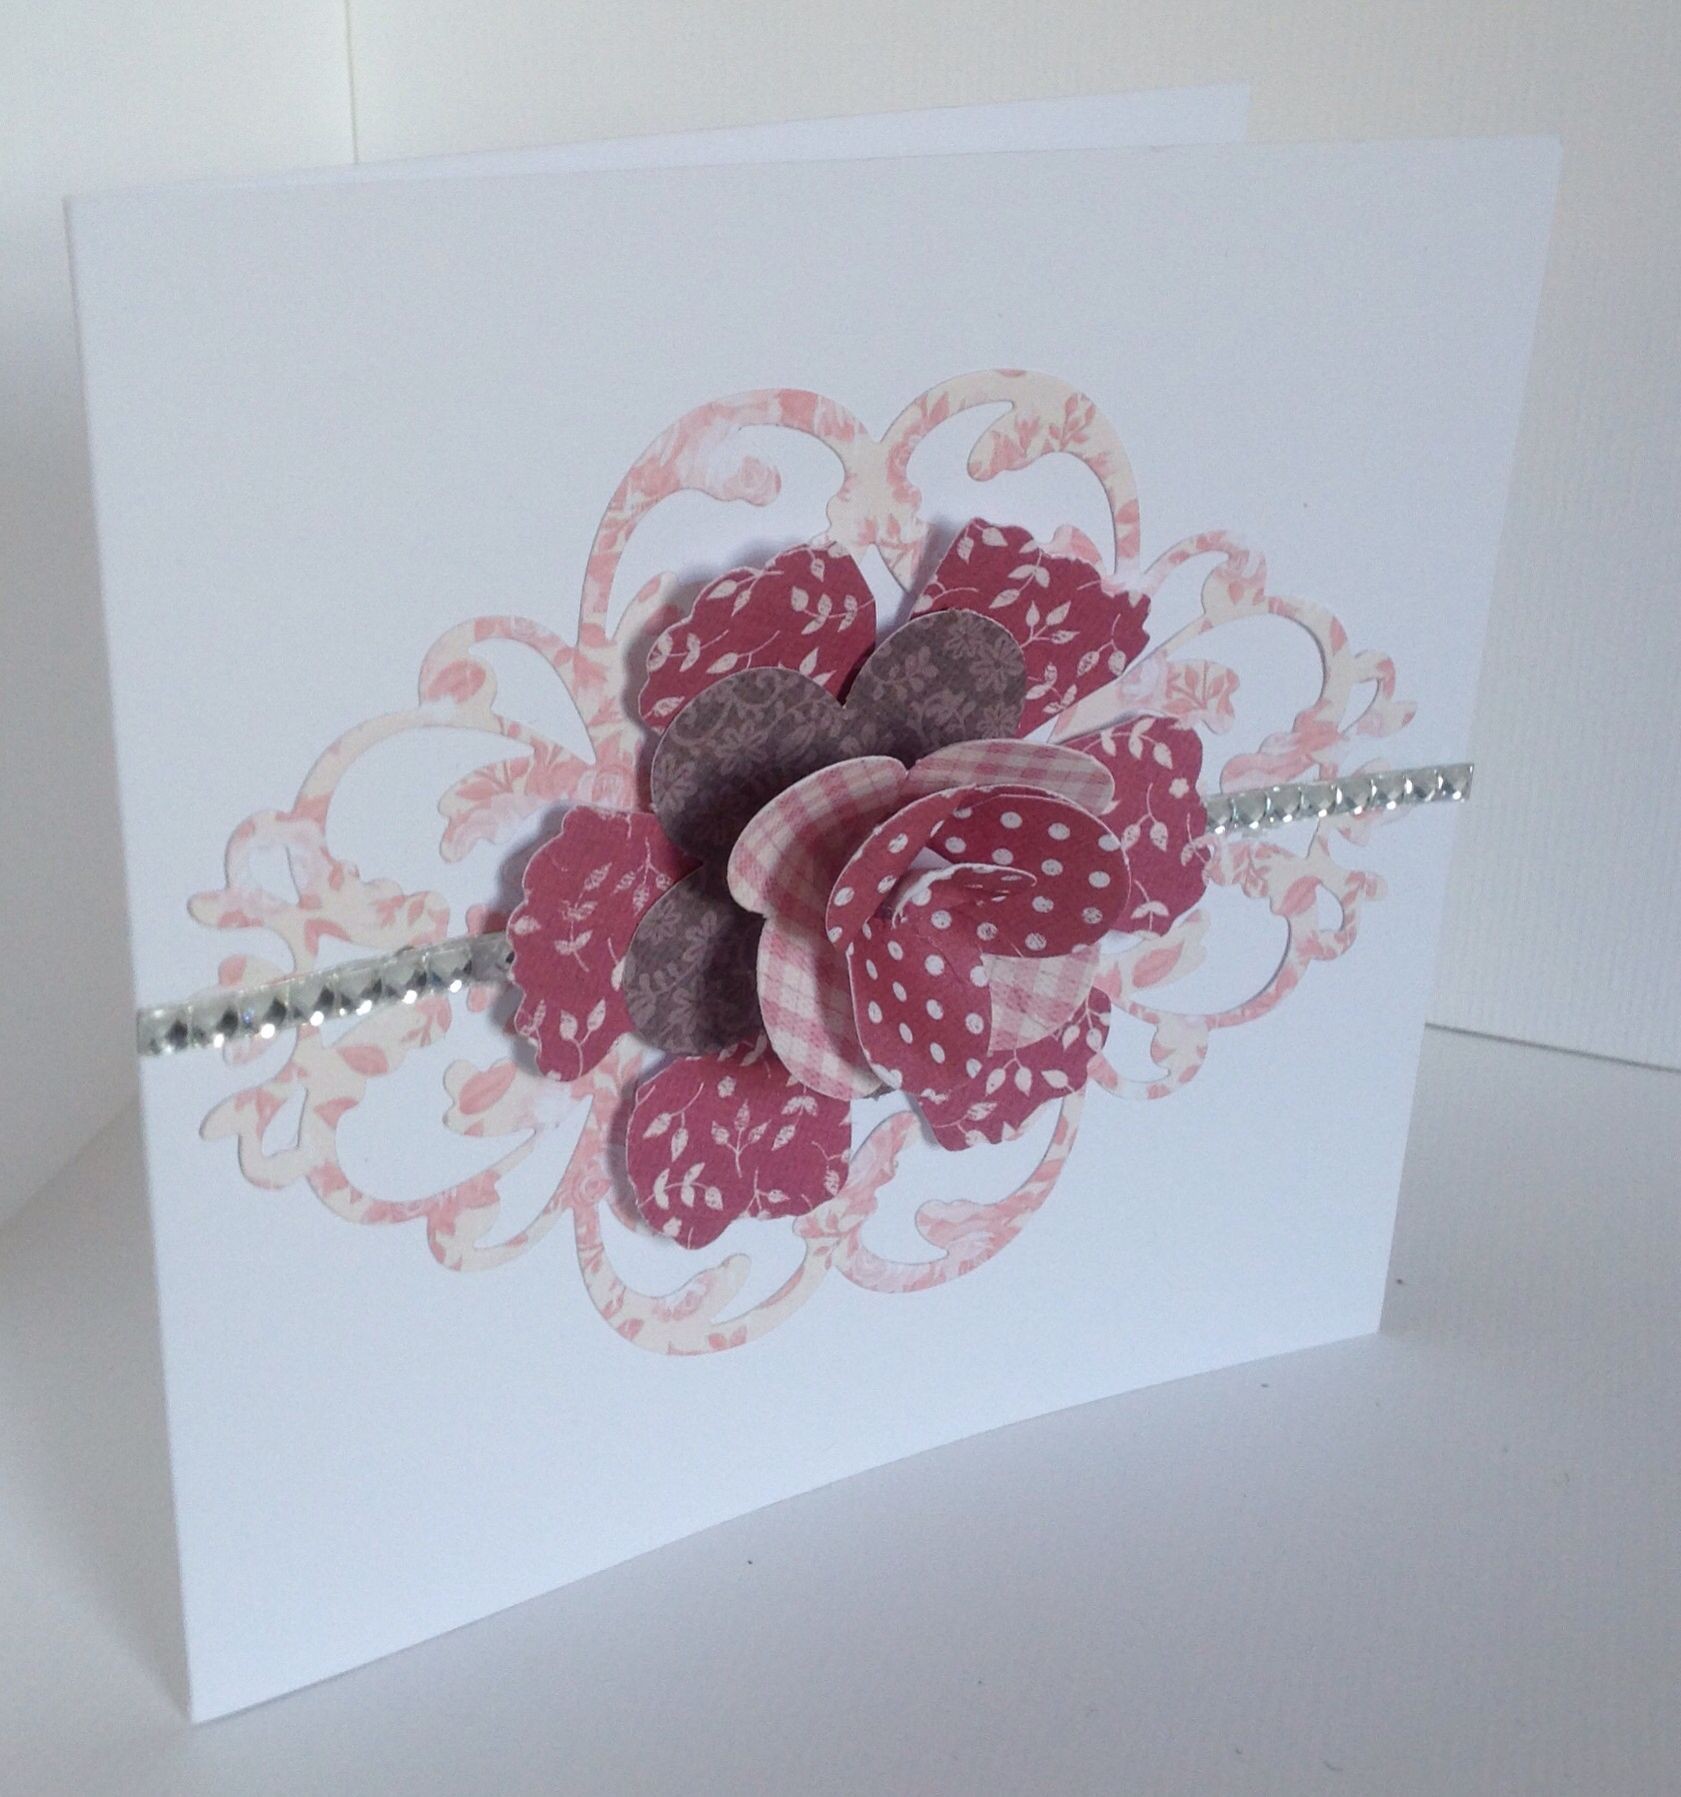 Serenity Papercraft Beautiful Card Created by Tina Boyden Using the Rosa Collection